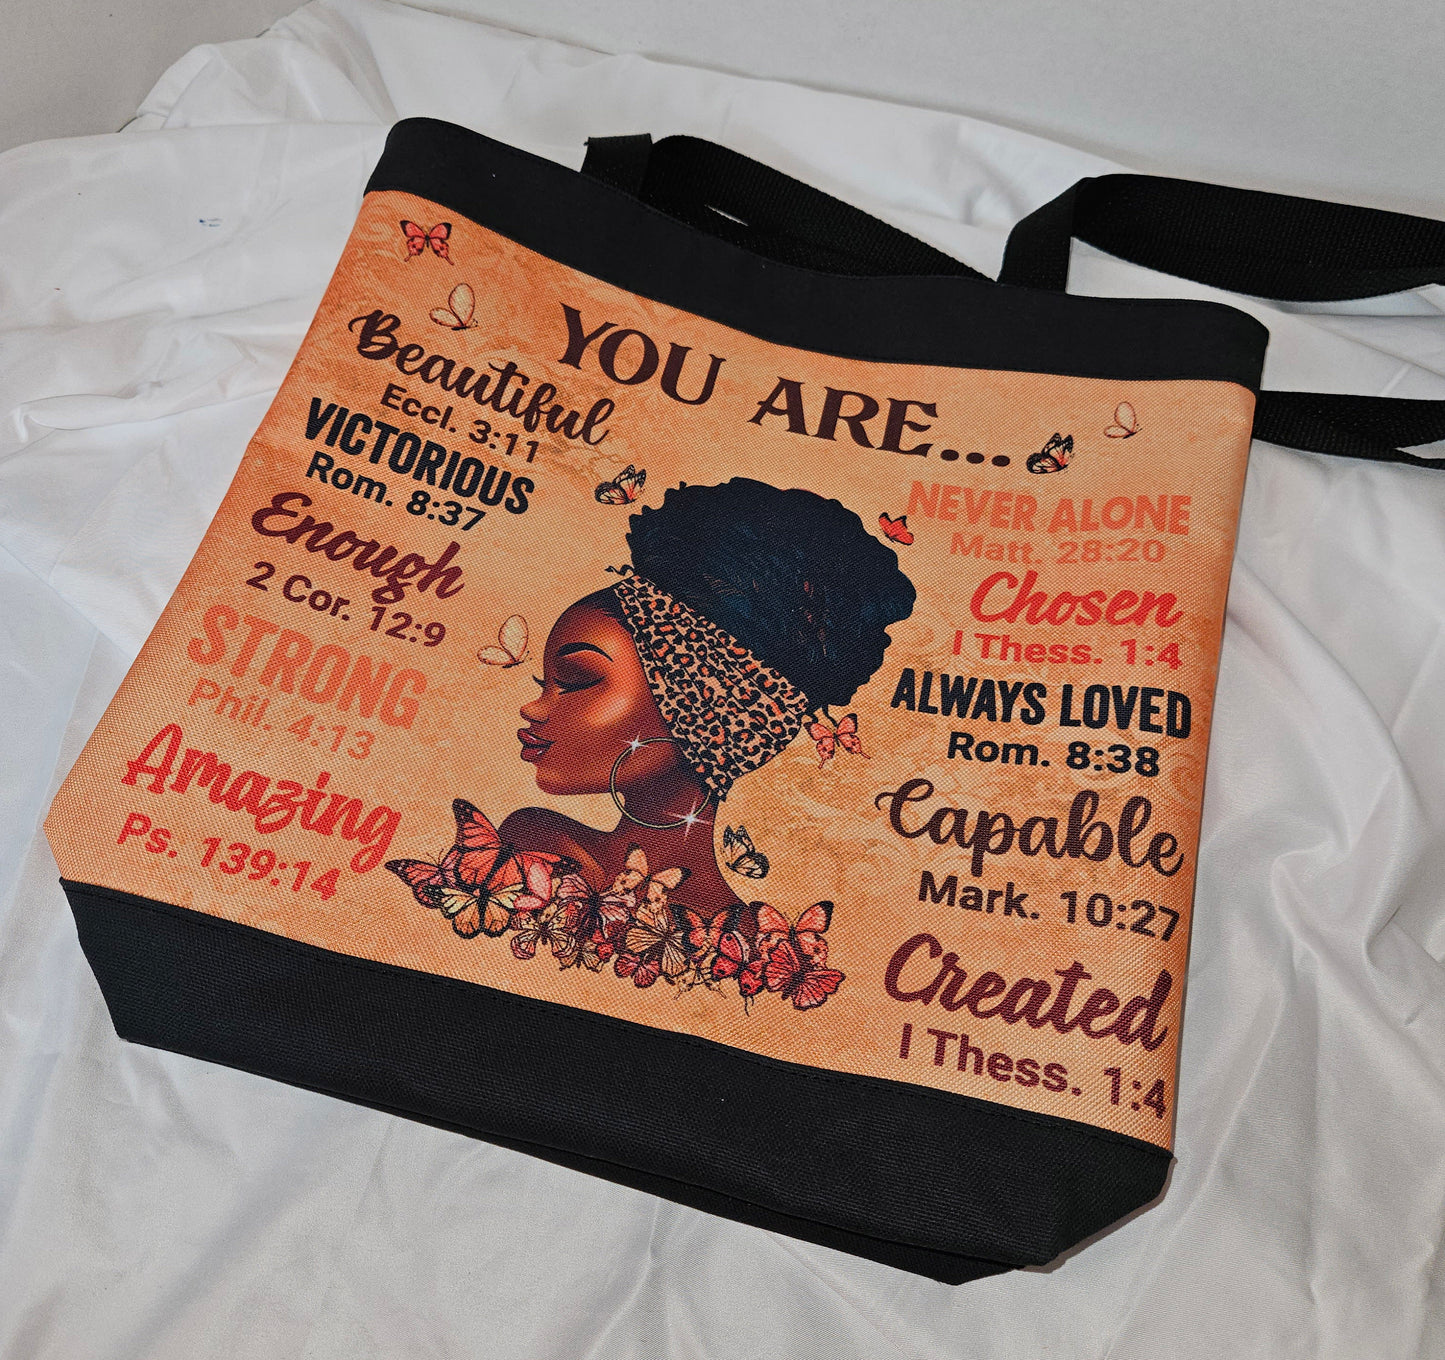 You Are... Inspirational Tote Bag